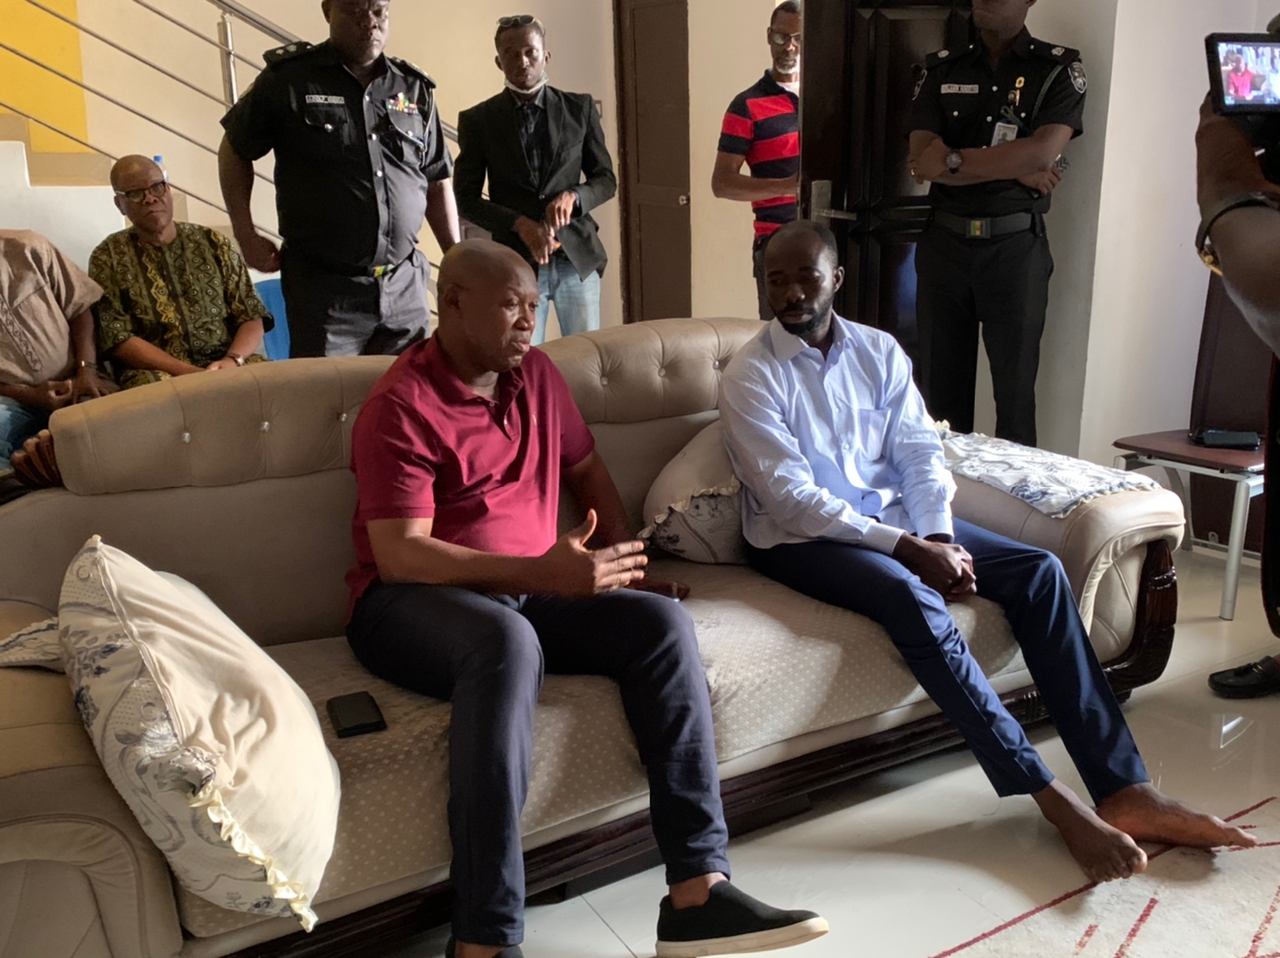 Lagos commissioner of police visits family of late Bolanle Raheem, a Lagos-based lawyer shot by a police officer